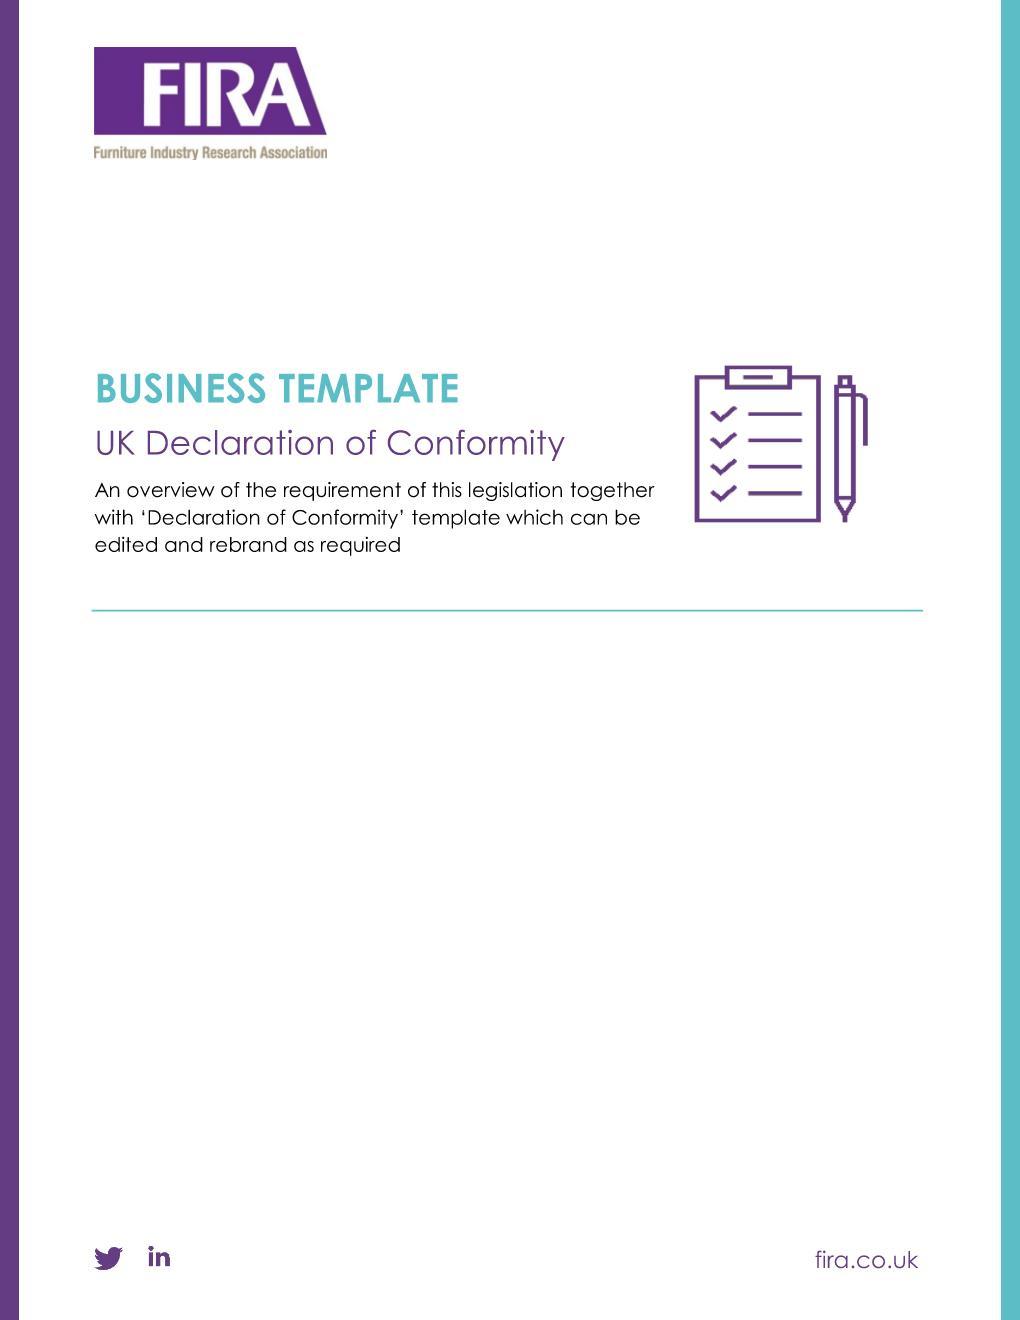 UK Declaration of Conformity Guidance and Template